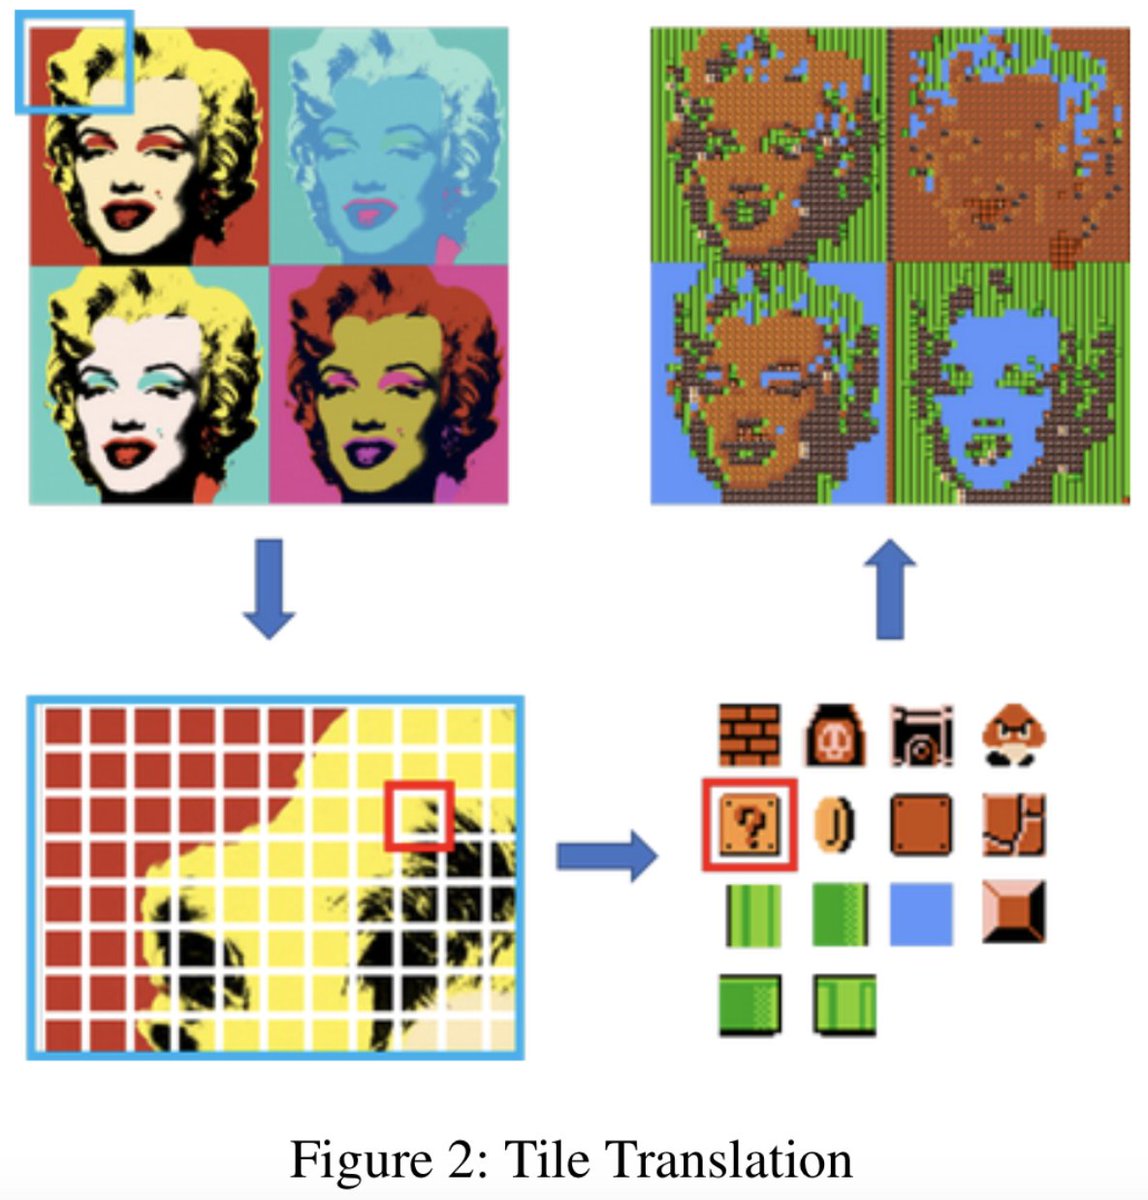 A huge collection of graduate students worked with me this Spring on the "Image-to-Level" system, which automatically converts images to game levels. The idea is to introduce a low-effort way for non-experts to employ machine learning for PCG.  http://guzdial.com/2020/aiide20-poster.pdf